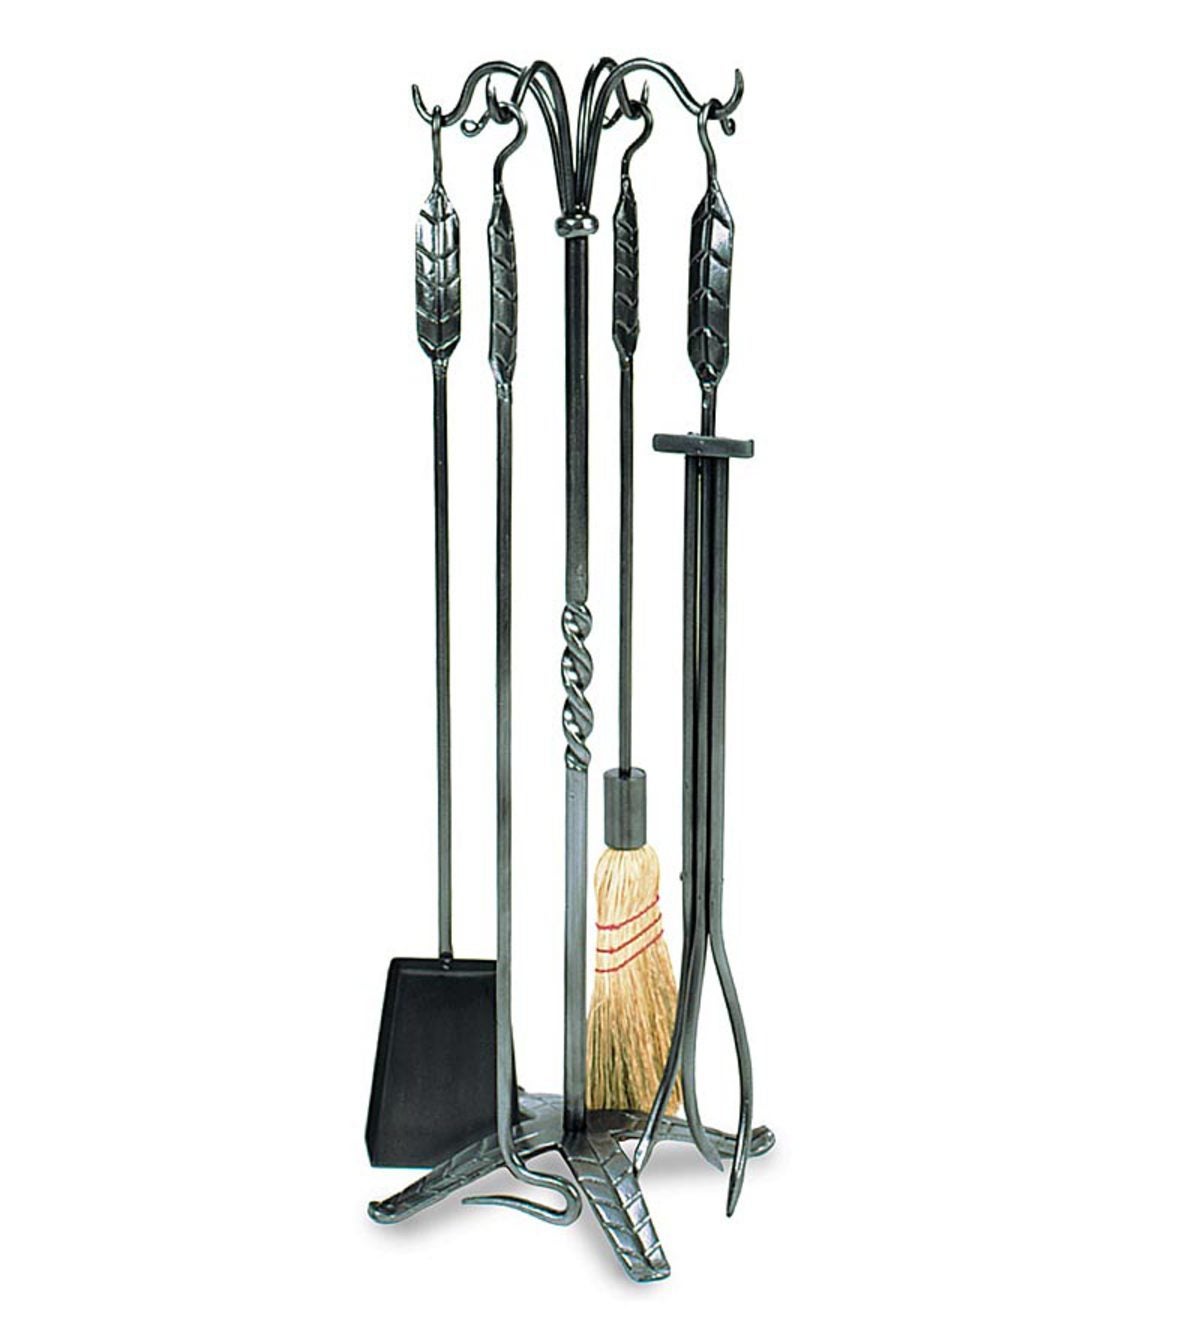 5-Piece Fireplace Tool Set with Leaf Handles